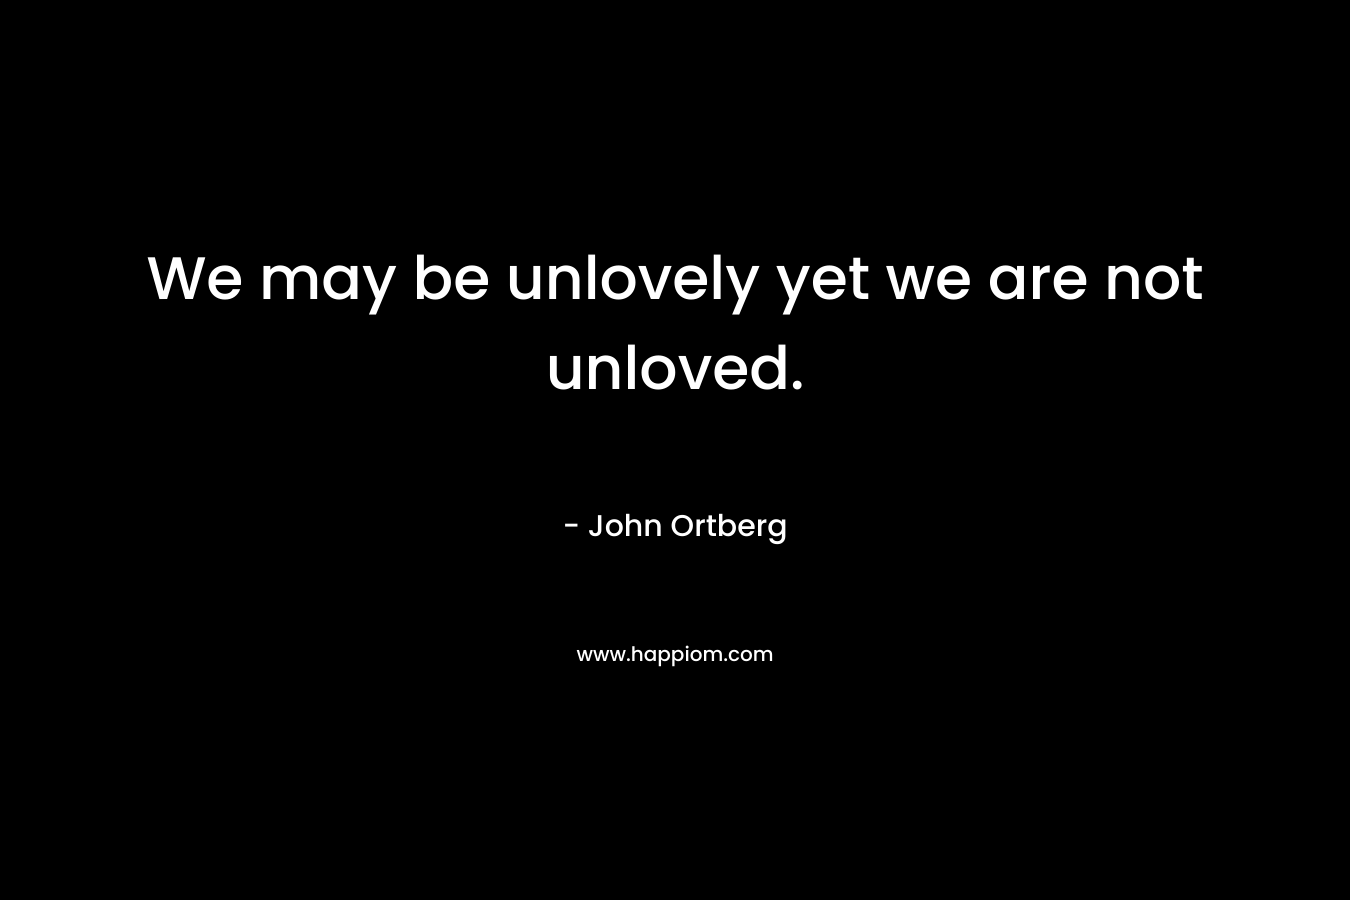 We may be unlovely yet we are not unloved.